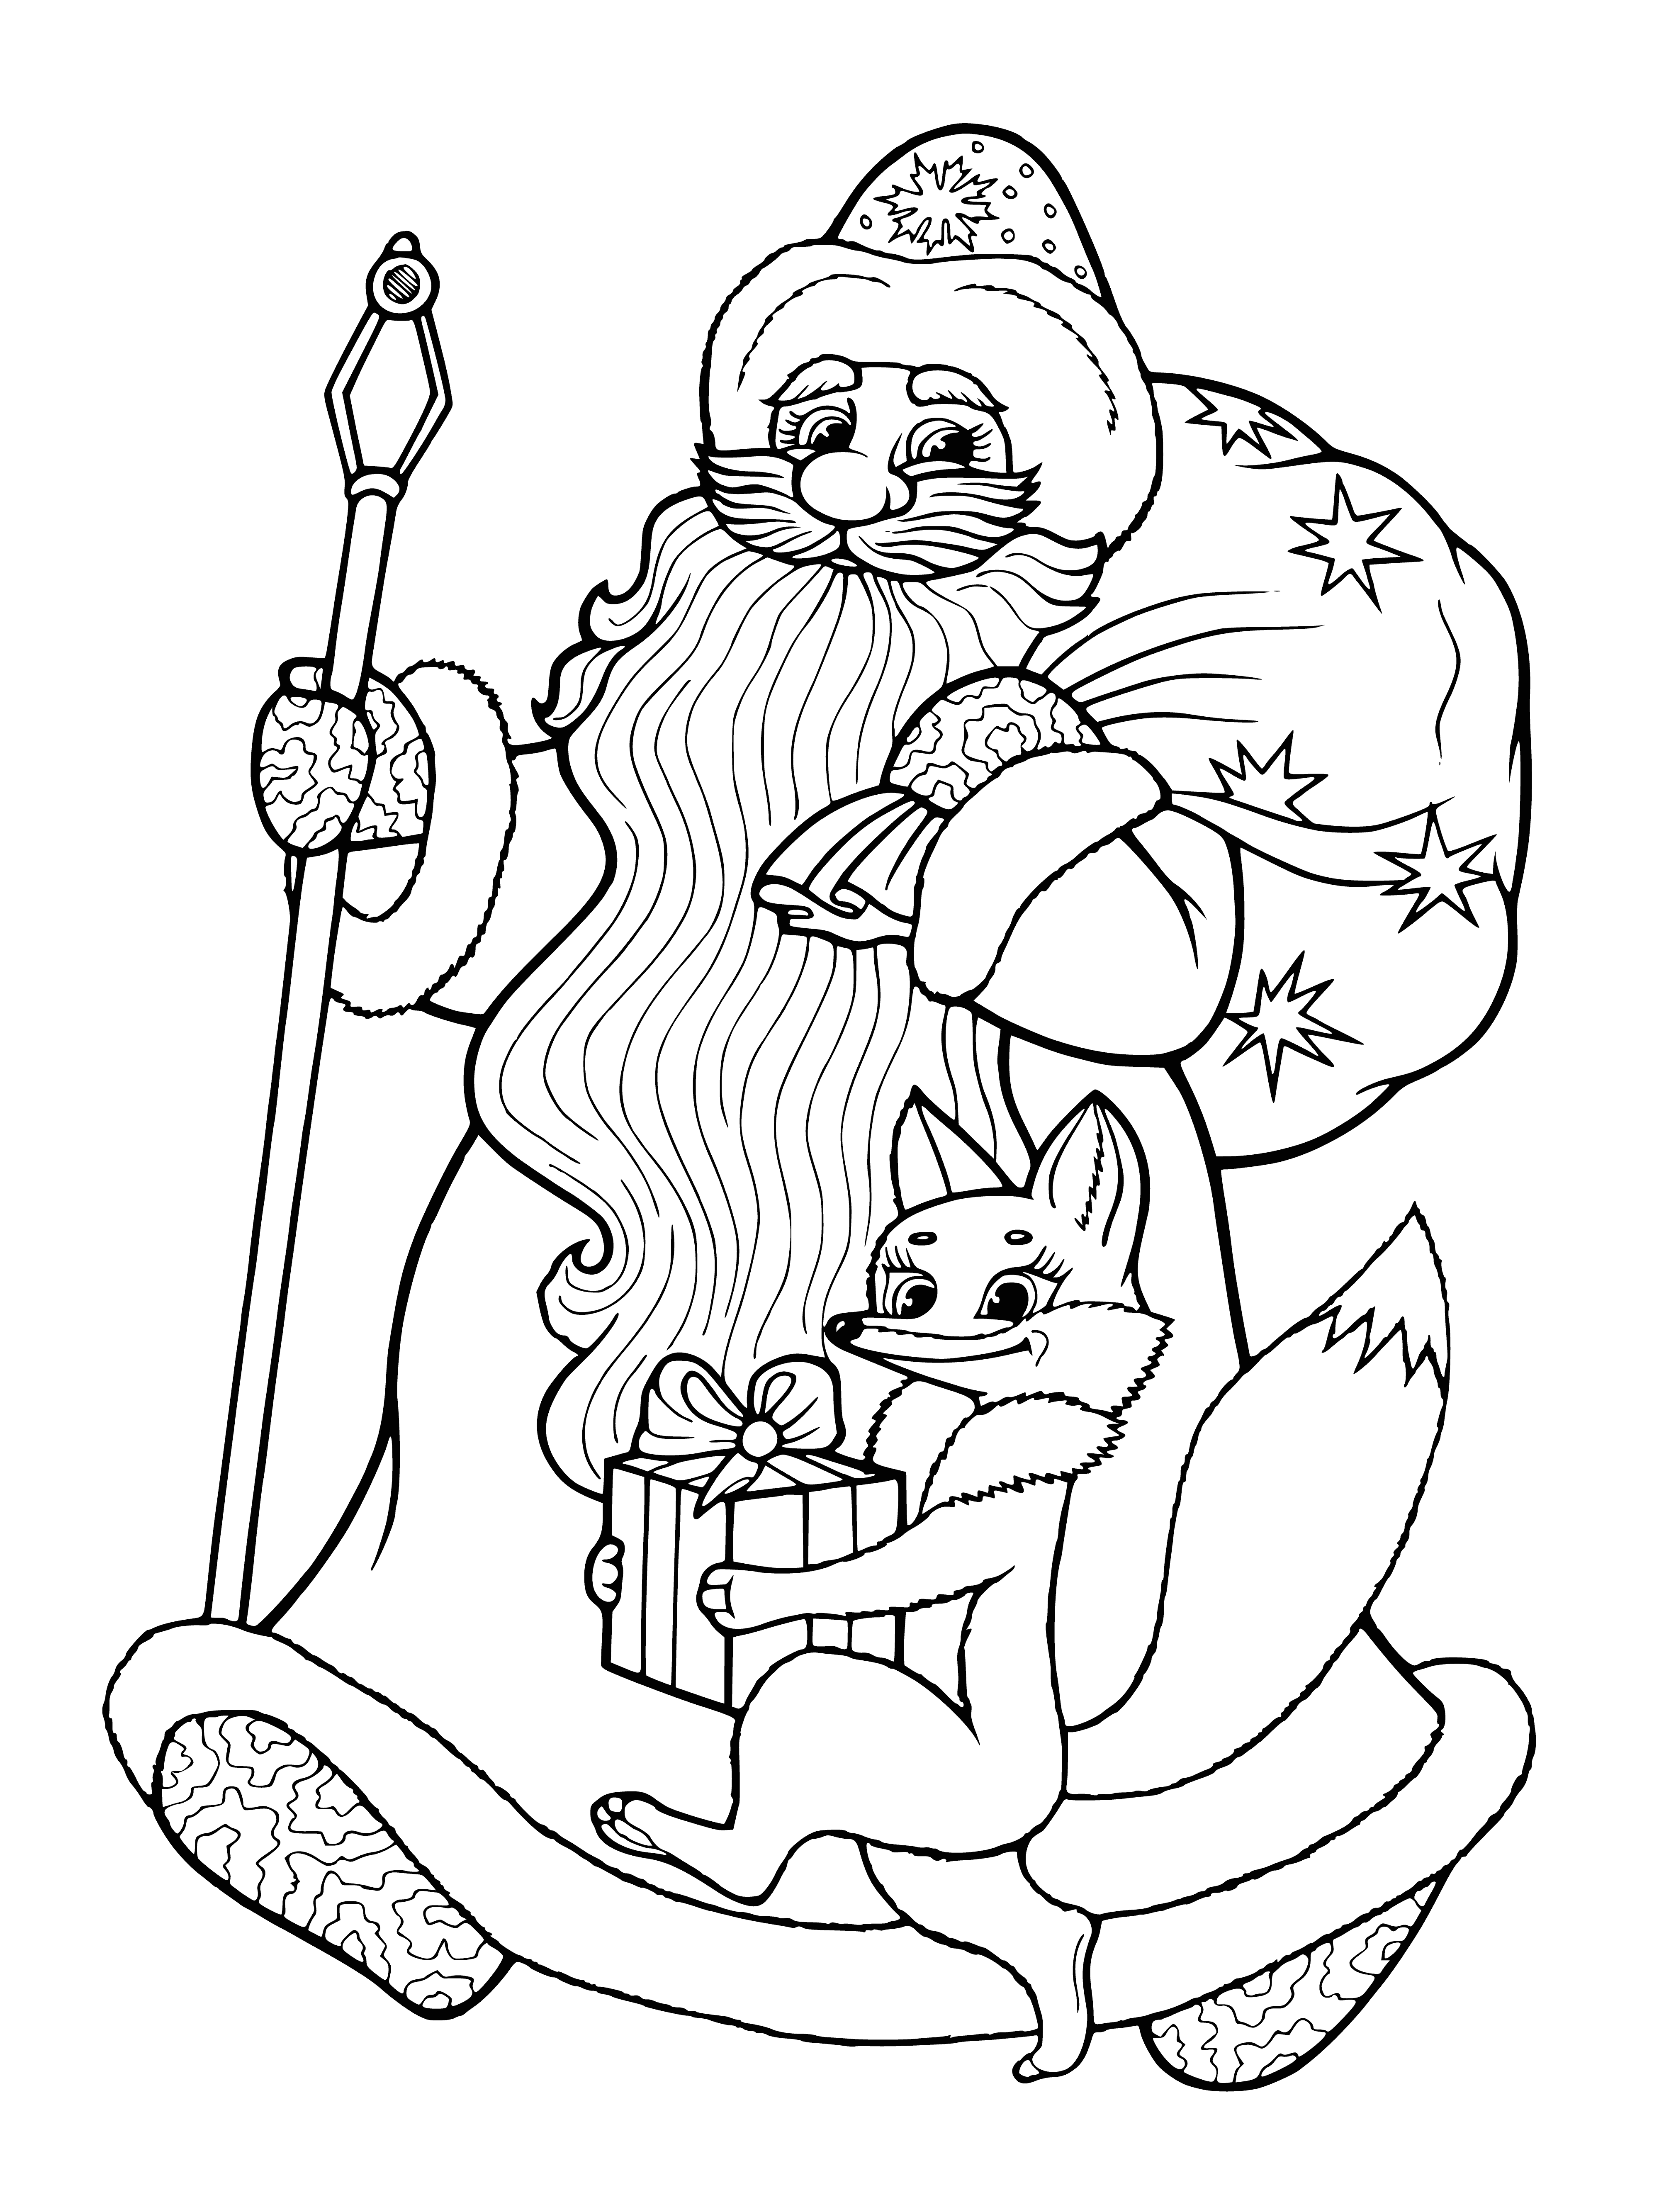 coloring page: Santa Claus is an elderly man with a beard, red coat & pants, a black belt and red hat with white fur trim, standing on a ladder and holding a sack of presents.